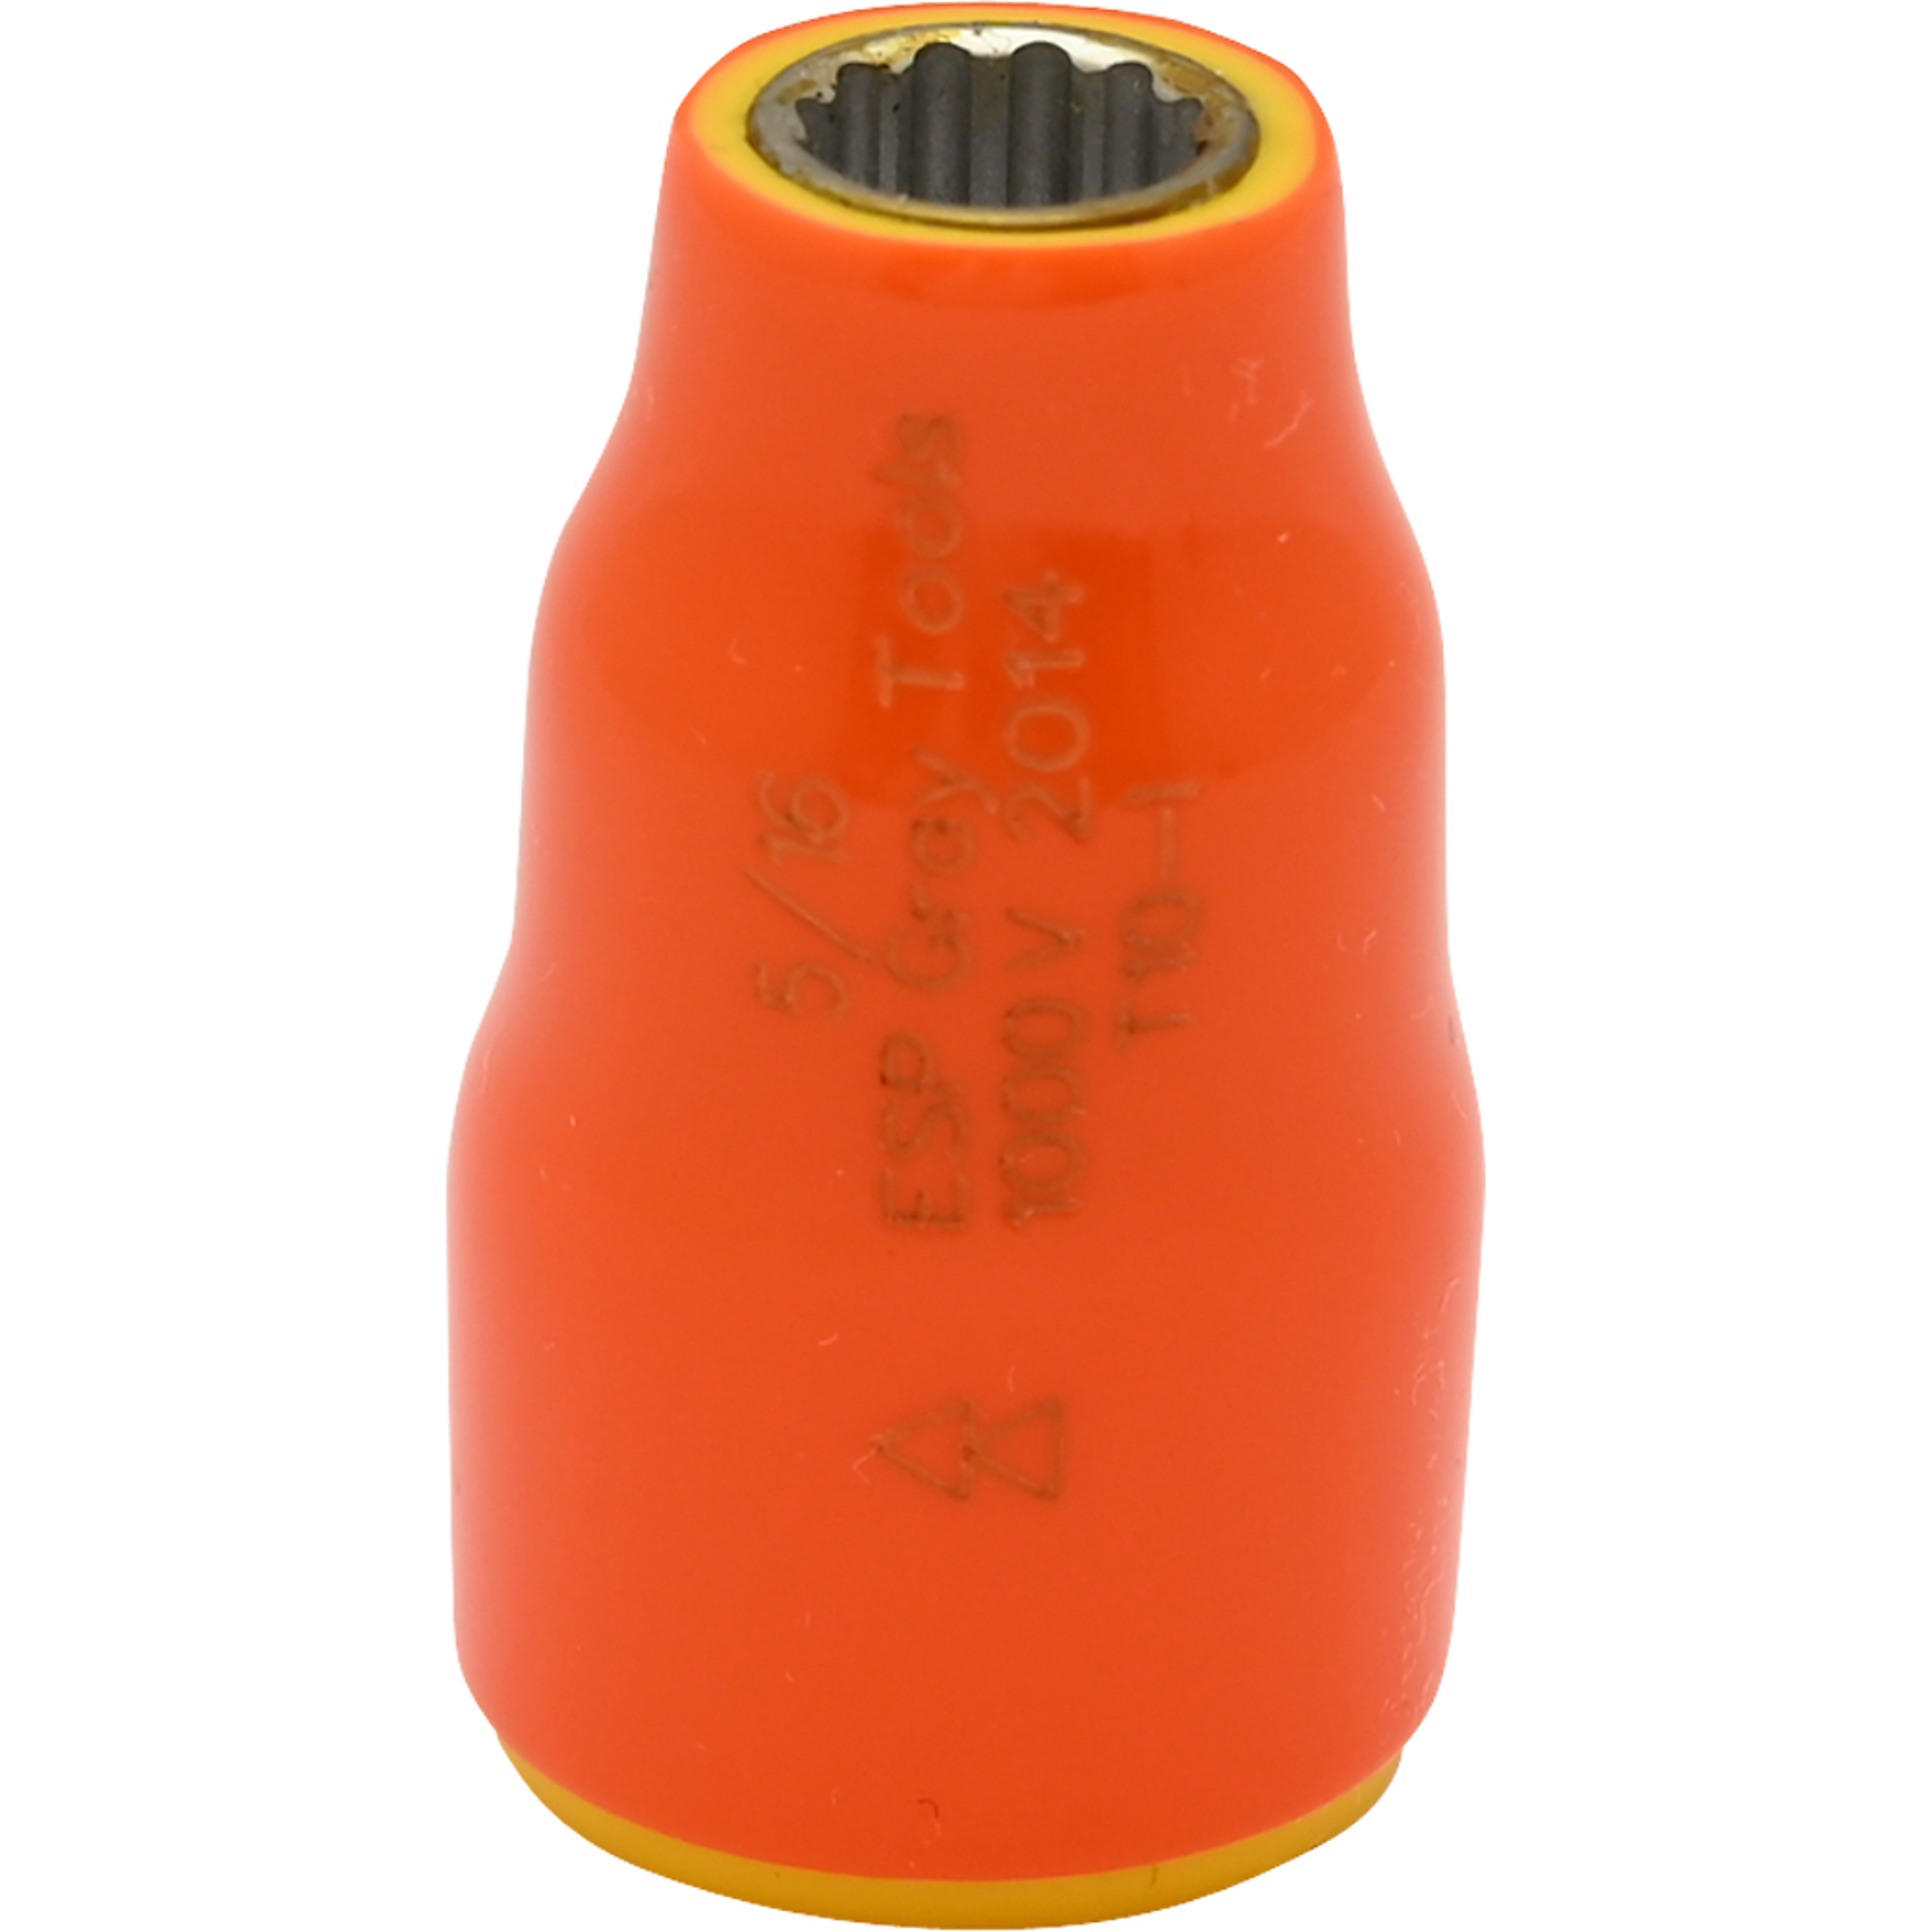 5/16Inch X 3/8Inch Drive Socket 1000V Insulated, Socket Size 5/16 in, Drive Size 3/8 in, Model - Gray Tools T10-I